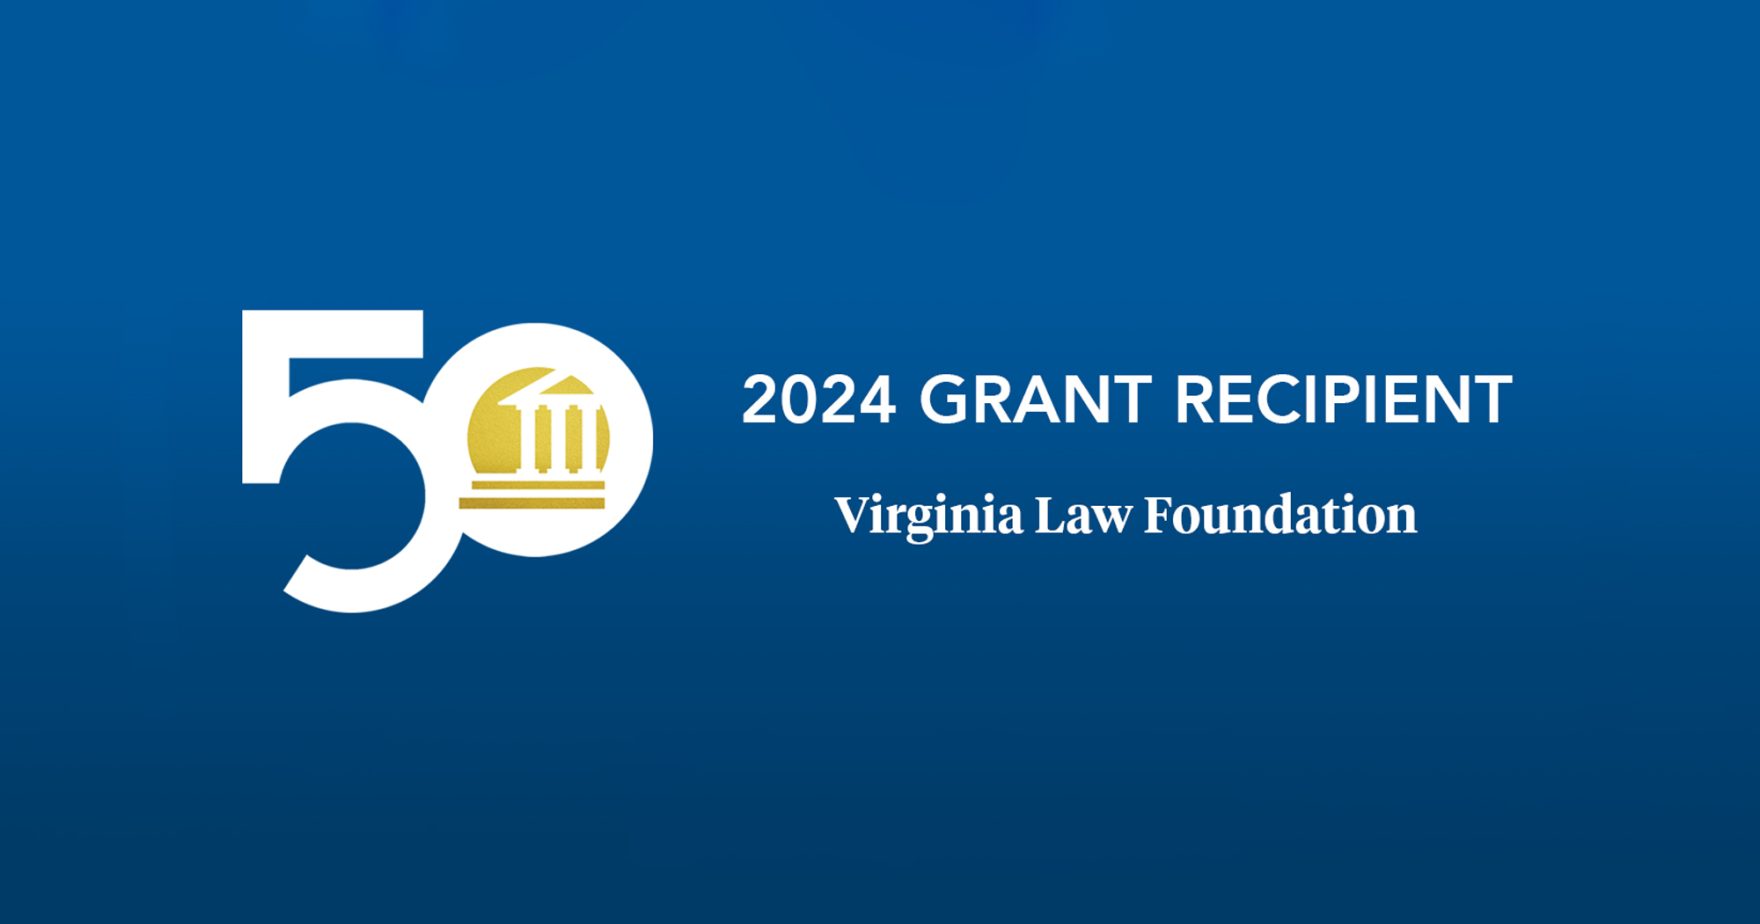 graphic with the words: 2024 Grant Recipient Virginia Law Foundation